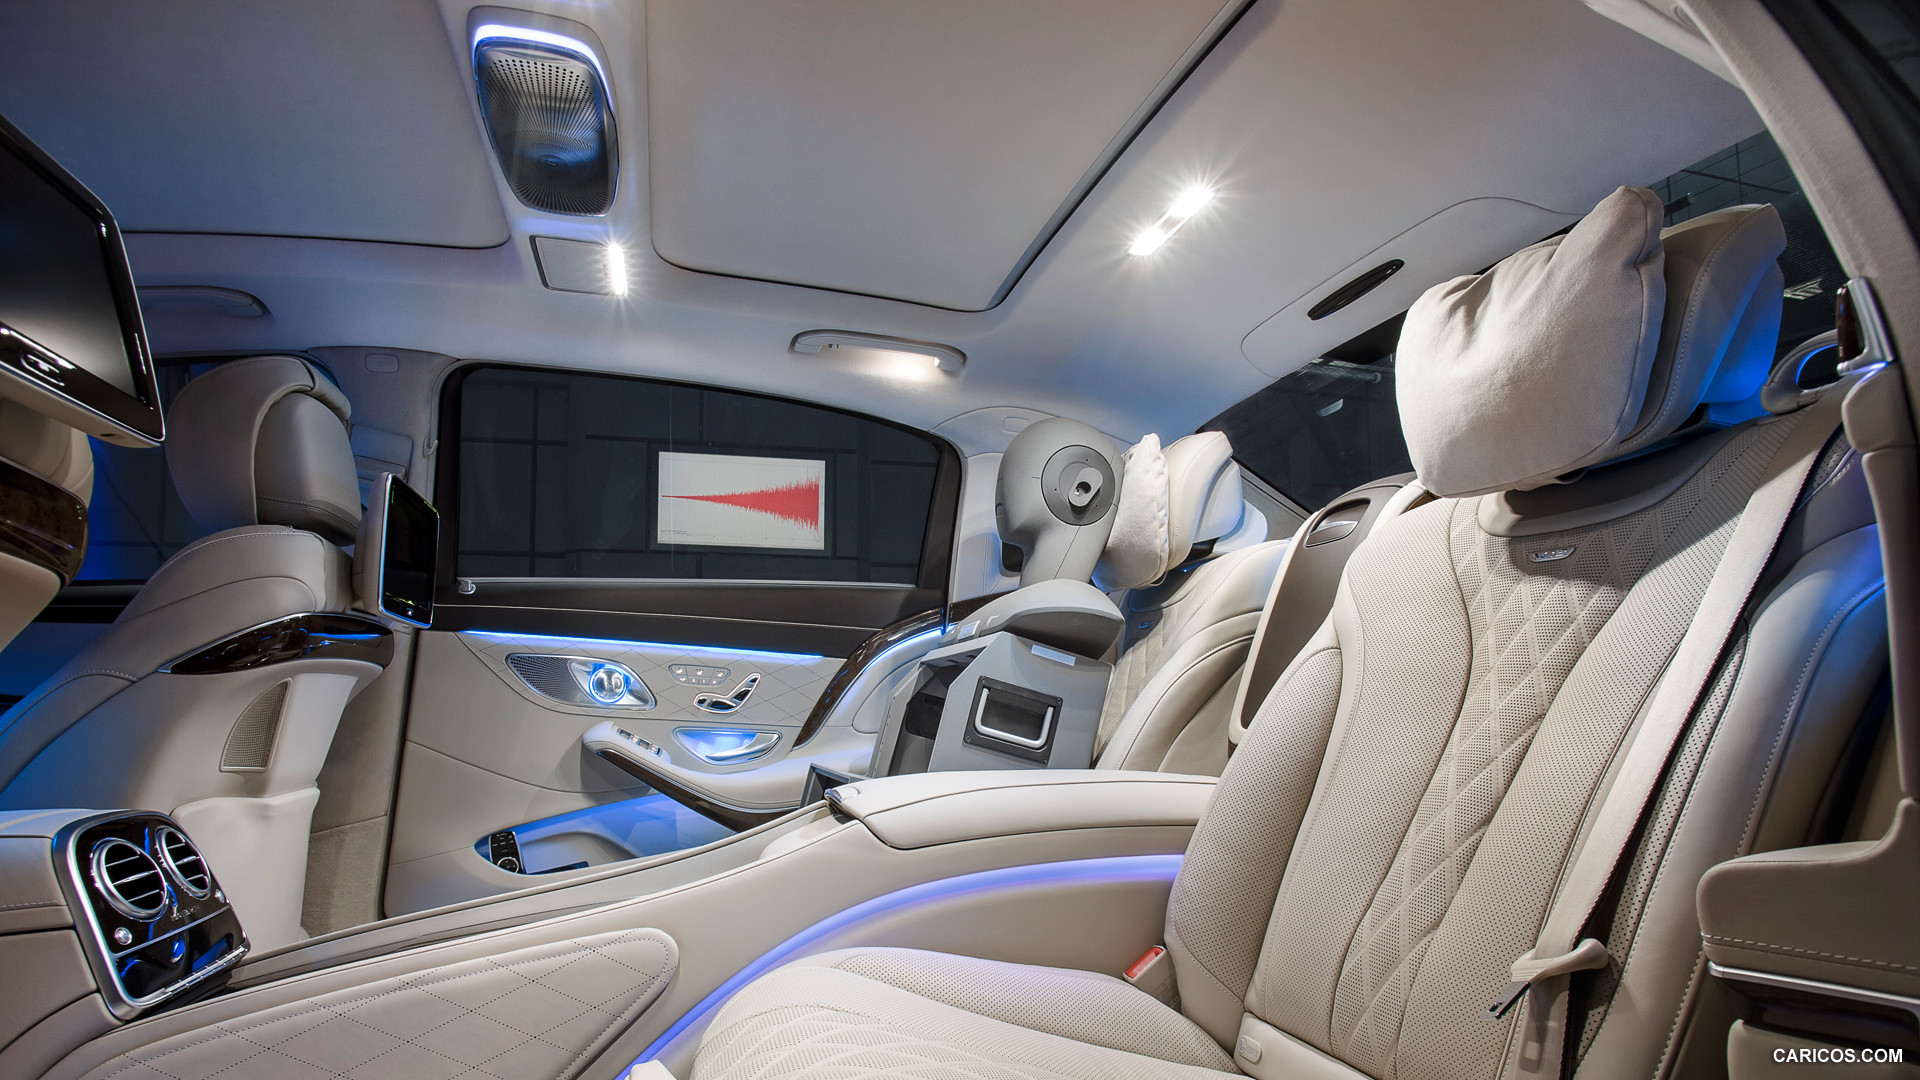 2016 Mercedes-Maybach S-Class S600 - Interior Rear Seats, #35 of 225